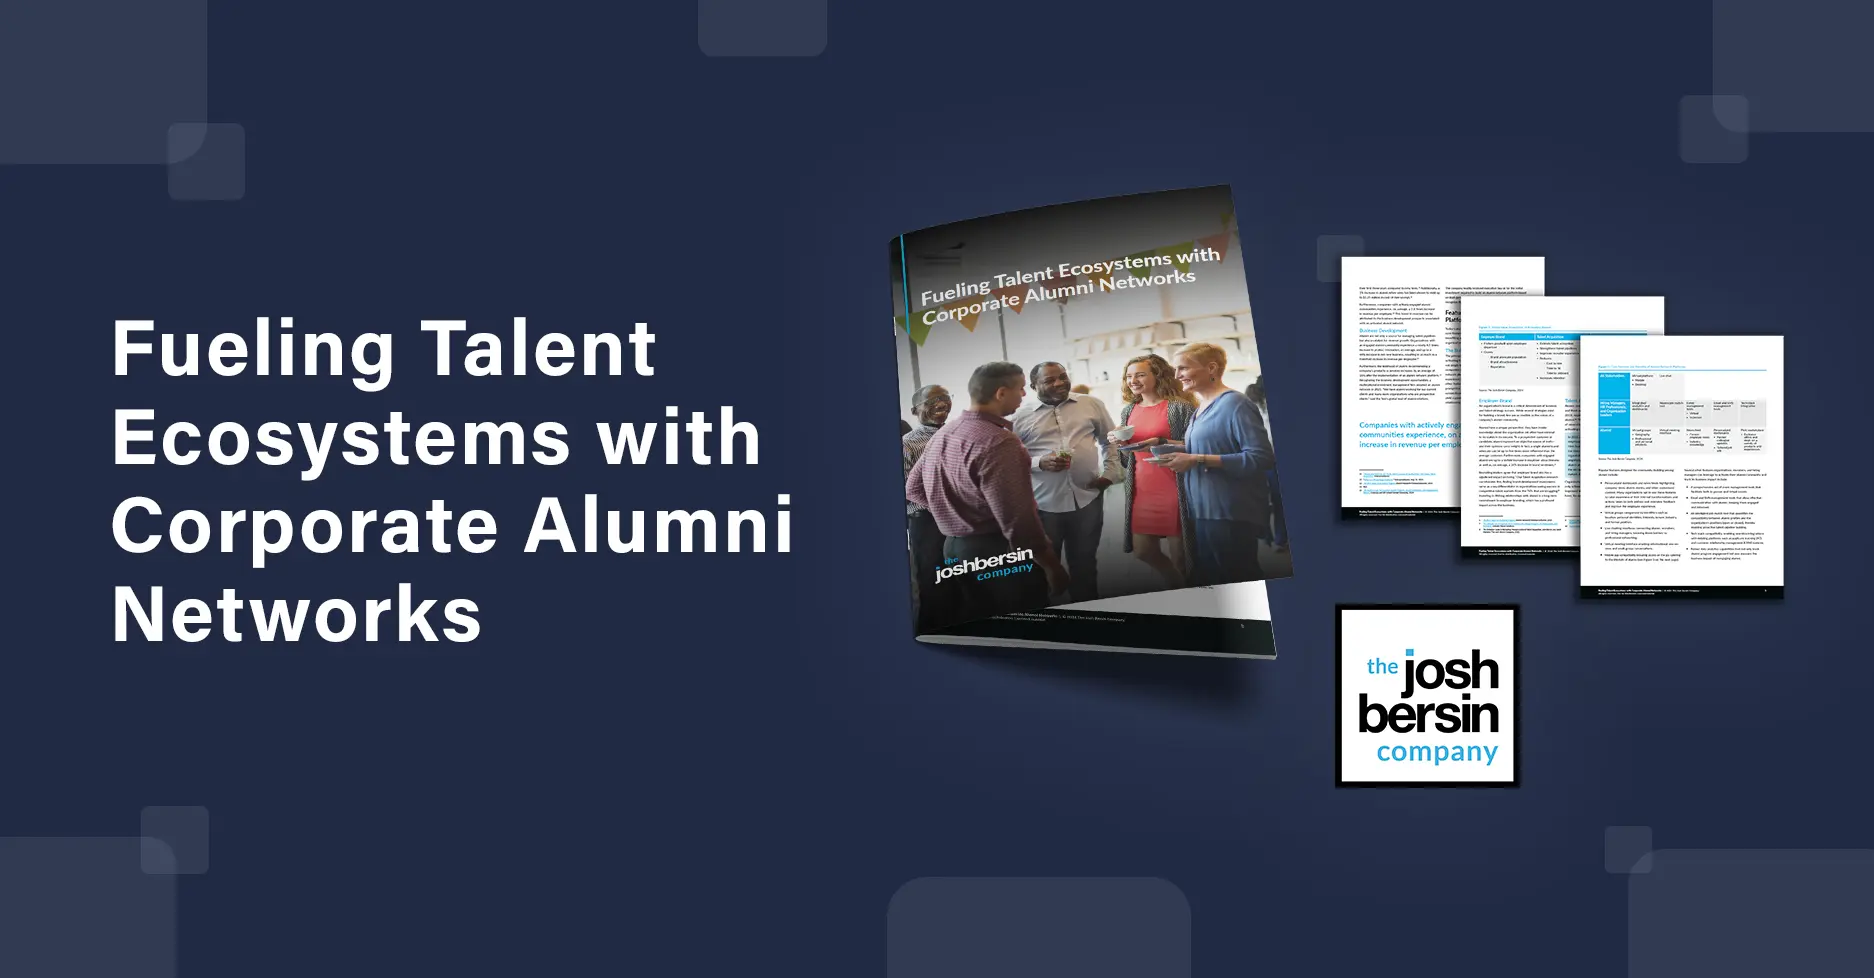 Fueling Talent Ecosystems with Corporate Alumni Networks